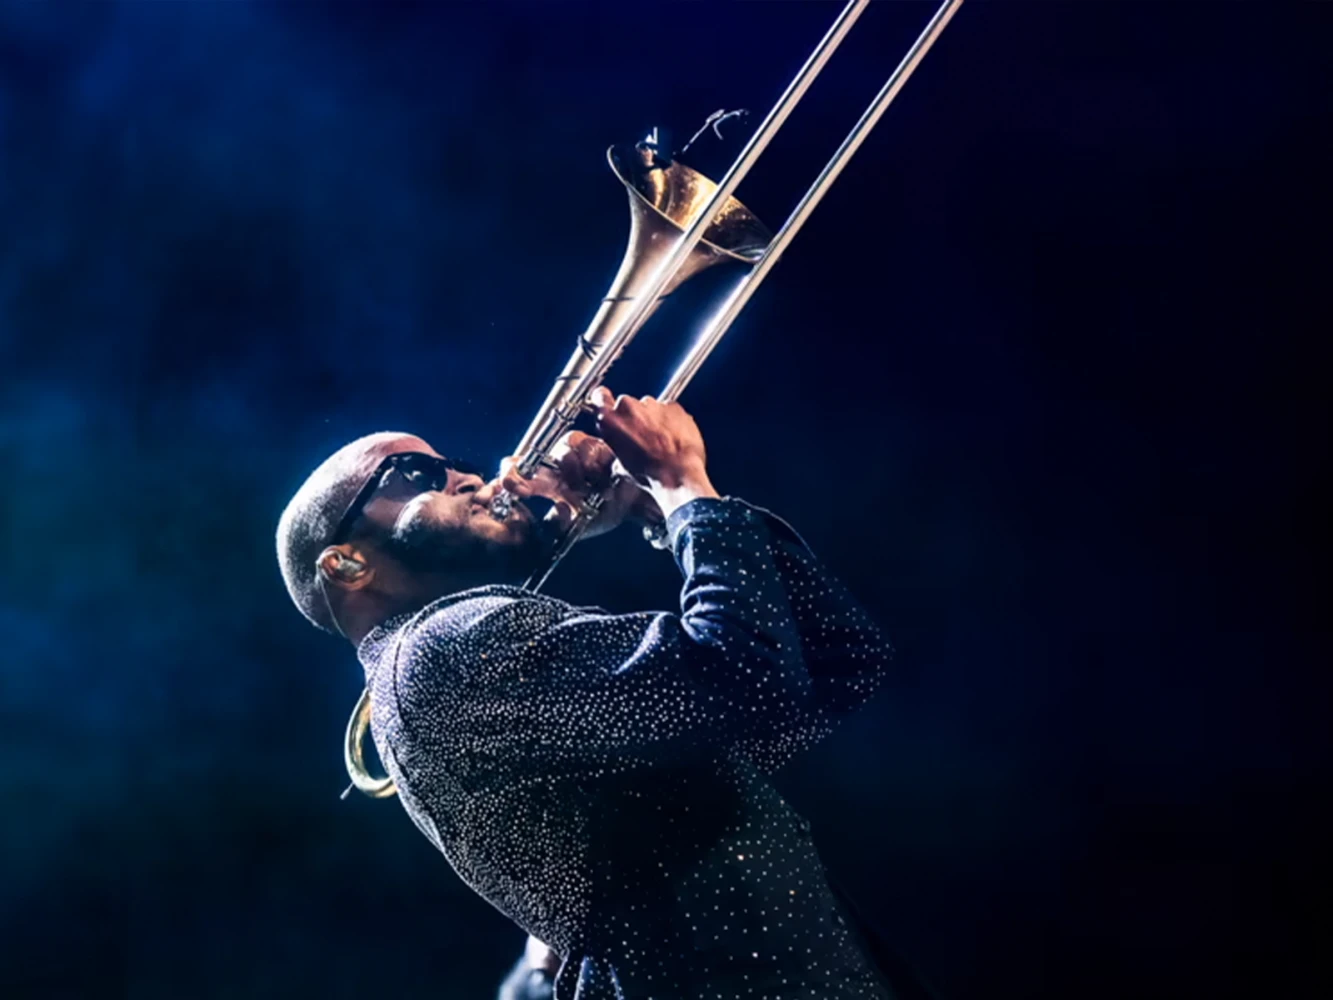 Trombone Shorty & Orleans Avenue, Big Boi: What to expect - 1